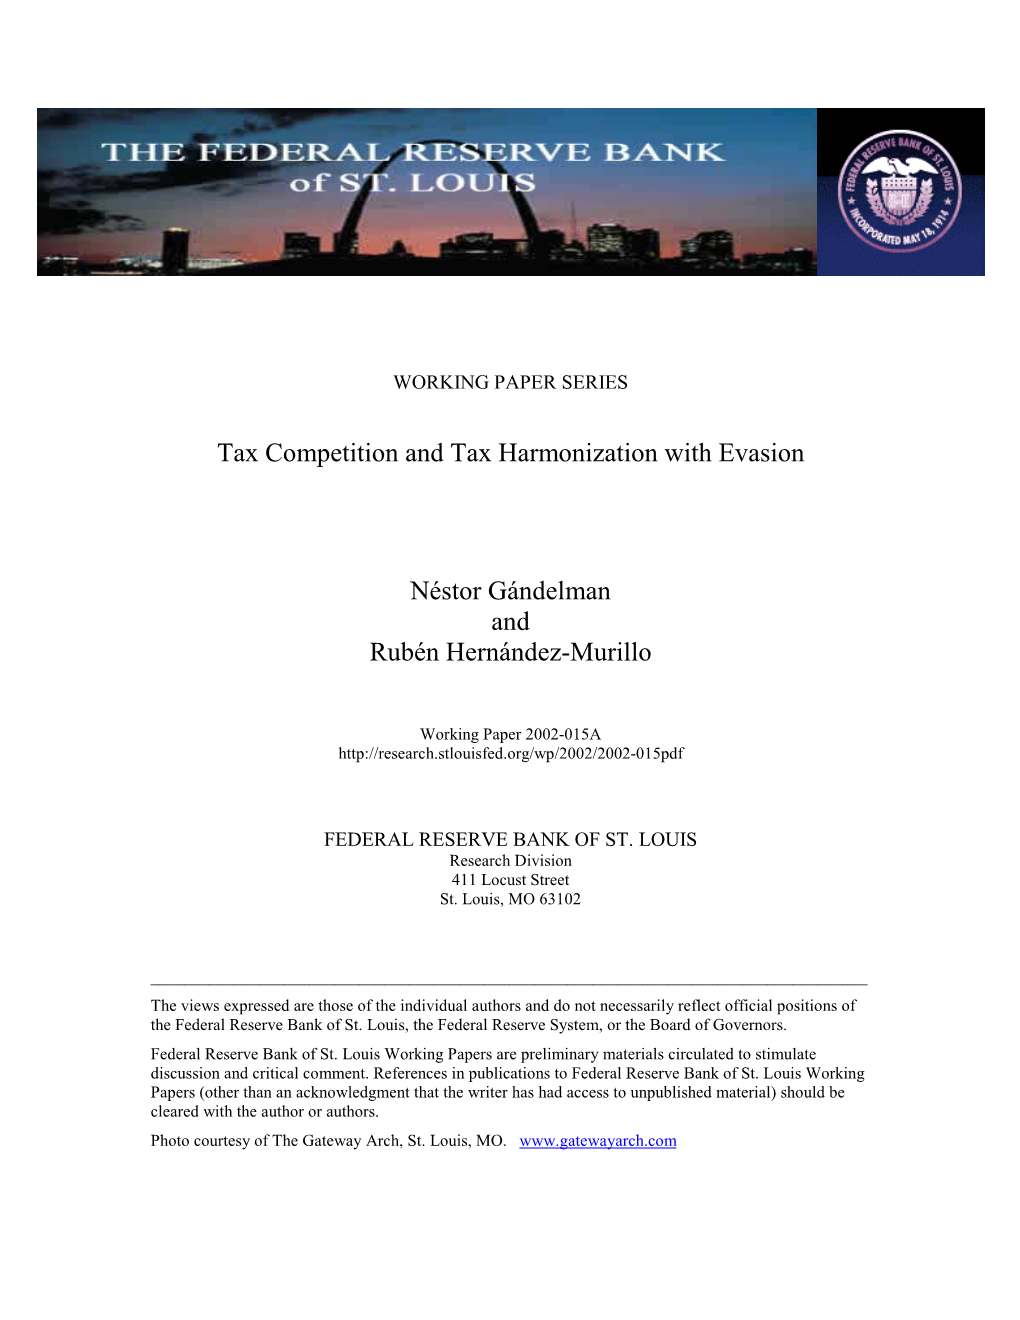 Tax Competition and Tax Harmonization with Evasion